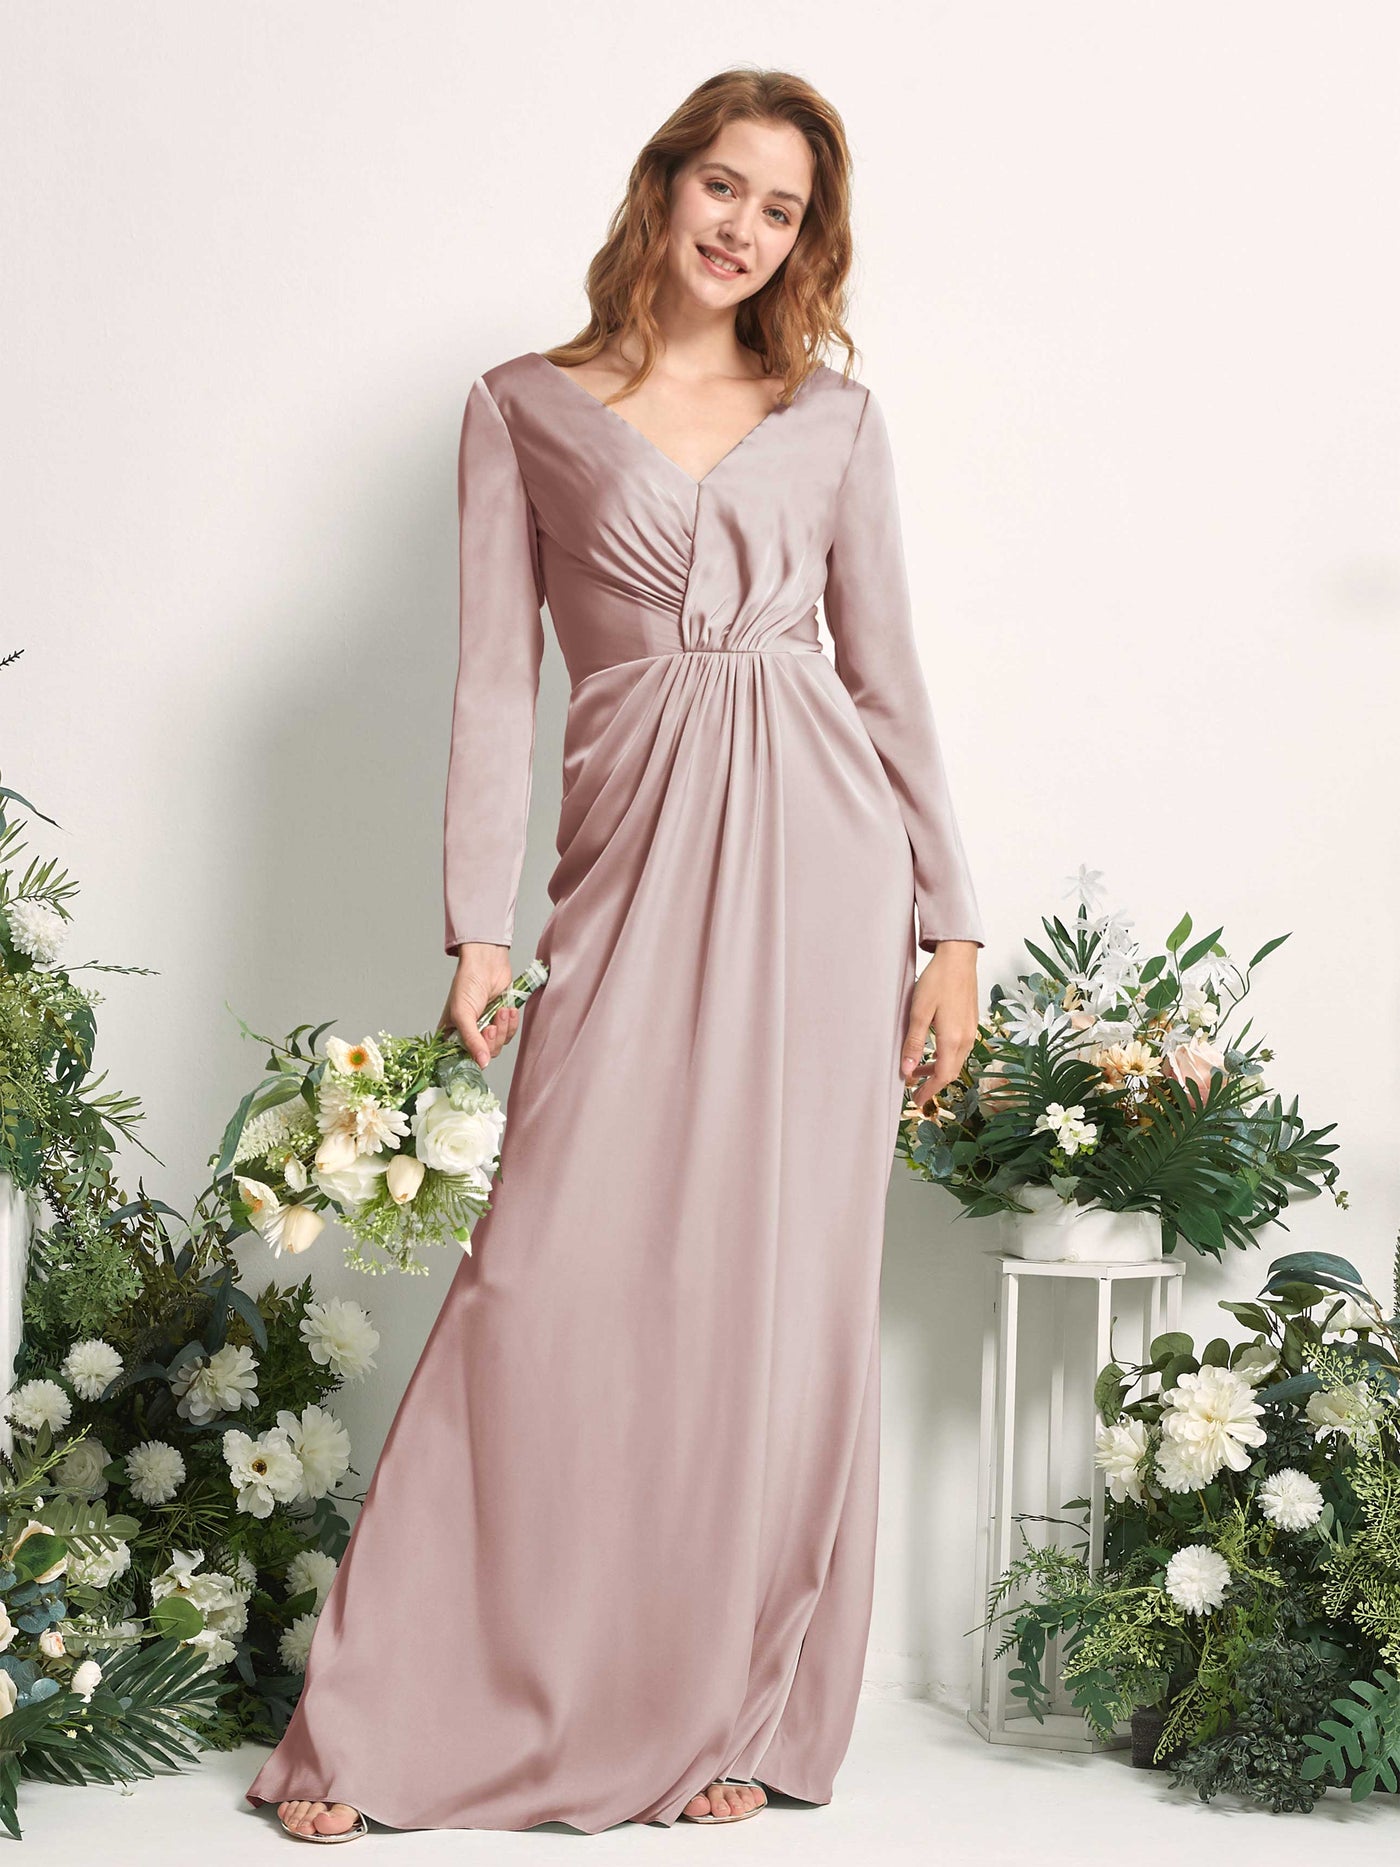 Dusty Rose Bridesmaid Dresses Bridesmaid Dress A-line Satin V-neck Full Length Long Sleeves Wedding Party Dress (80225854)#color_dusty-rose